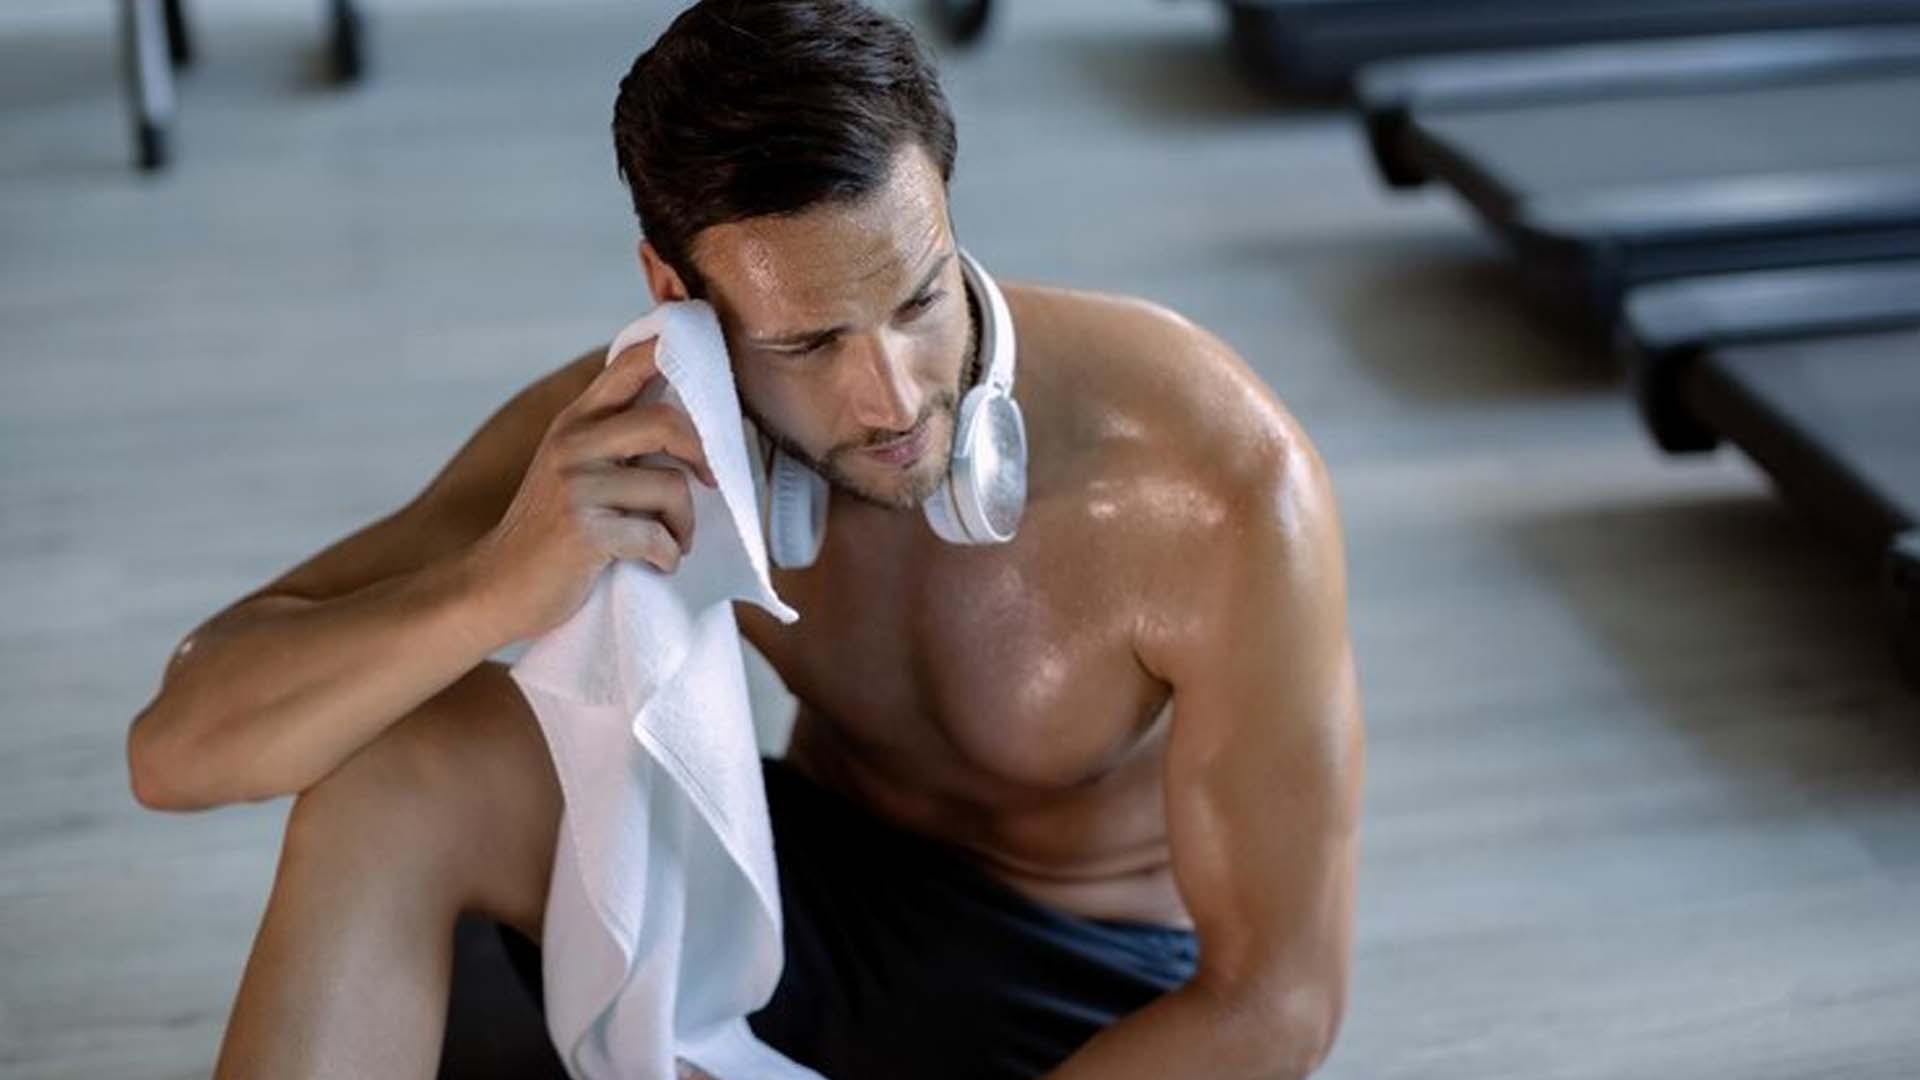 Excessive Sweating During Exercise